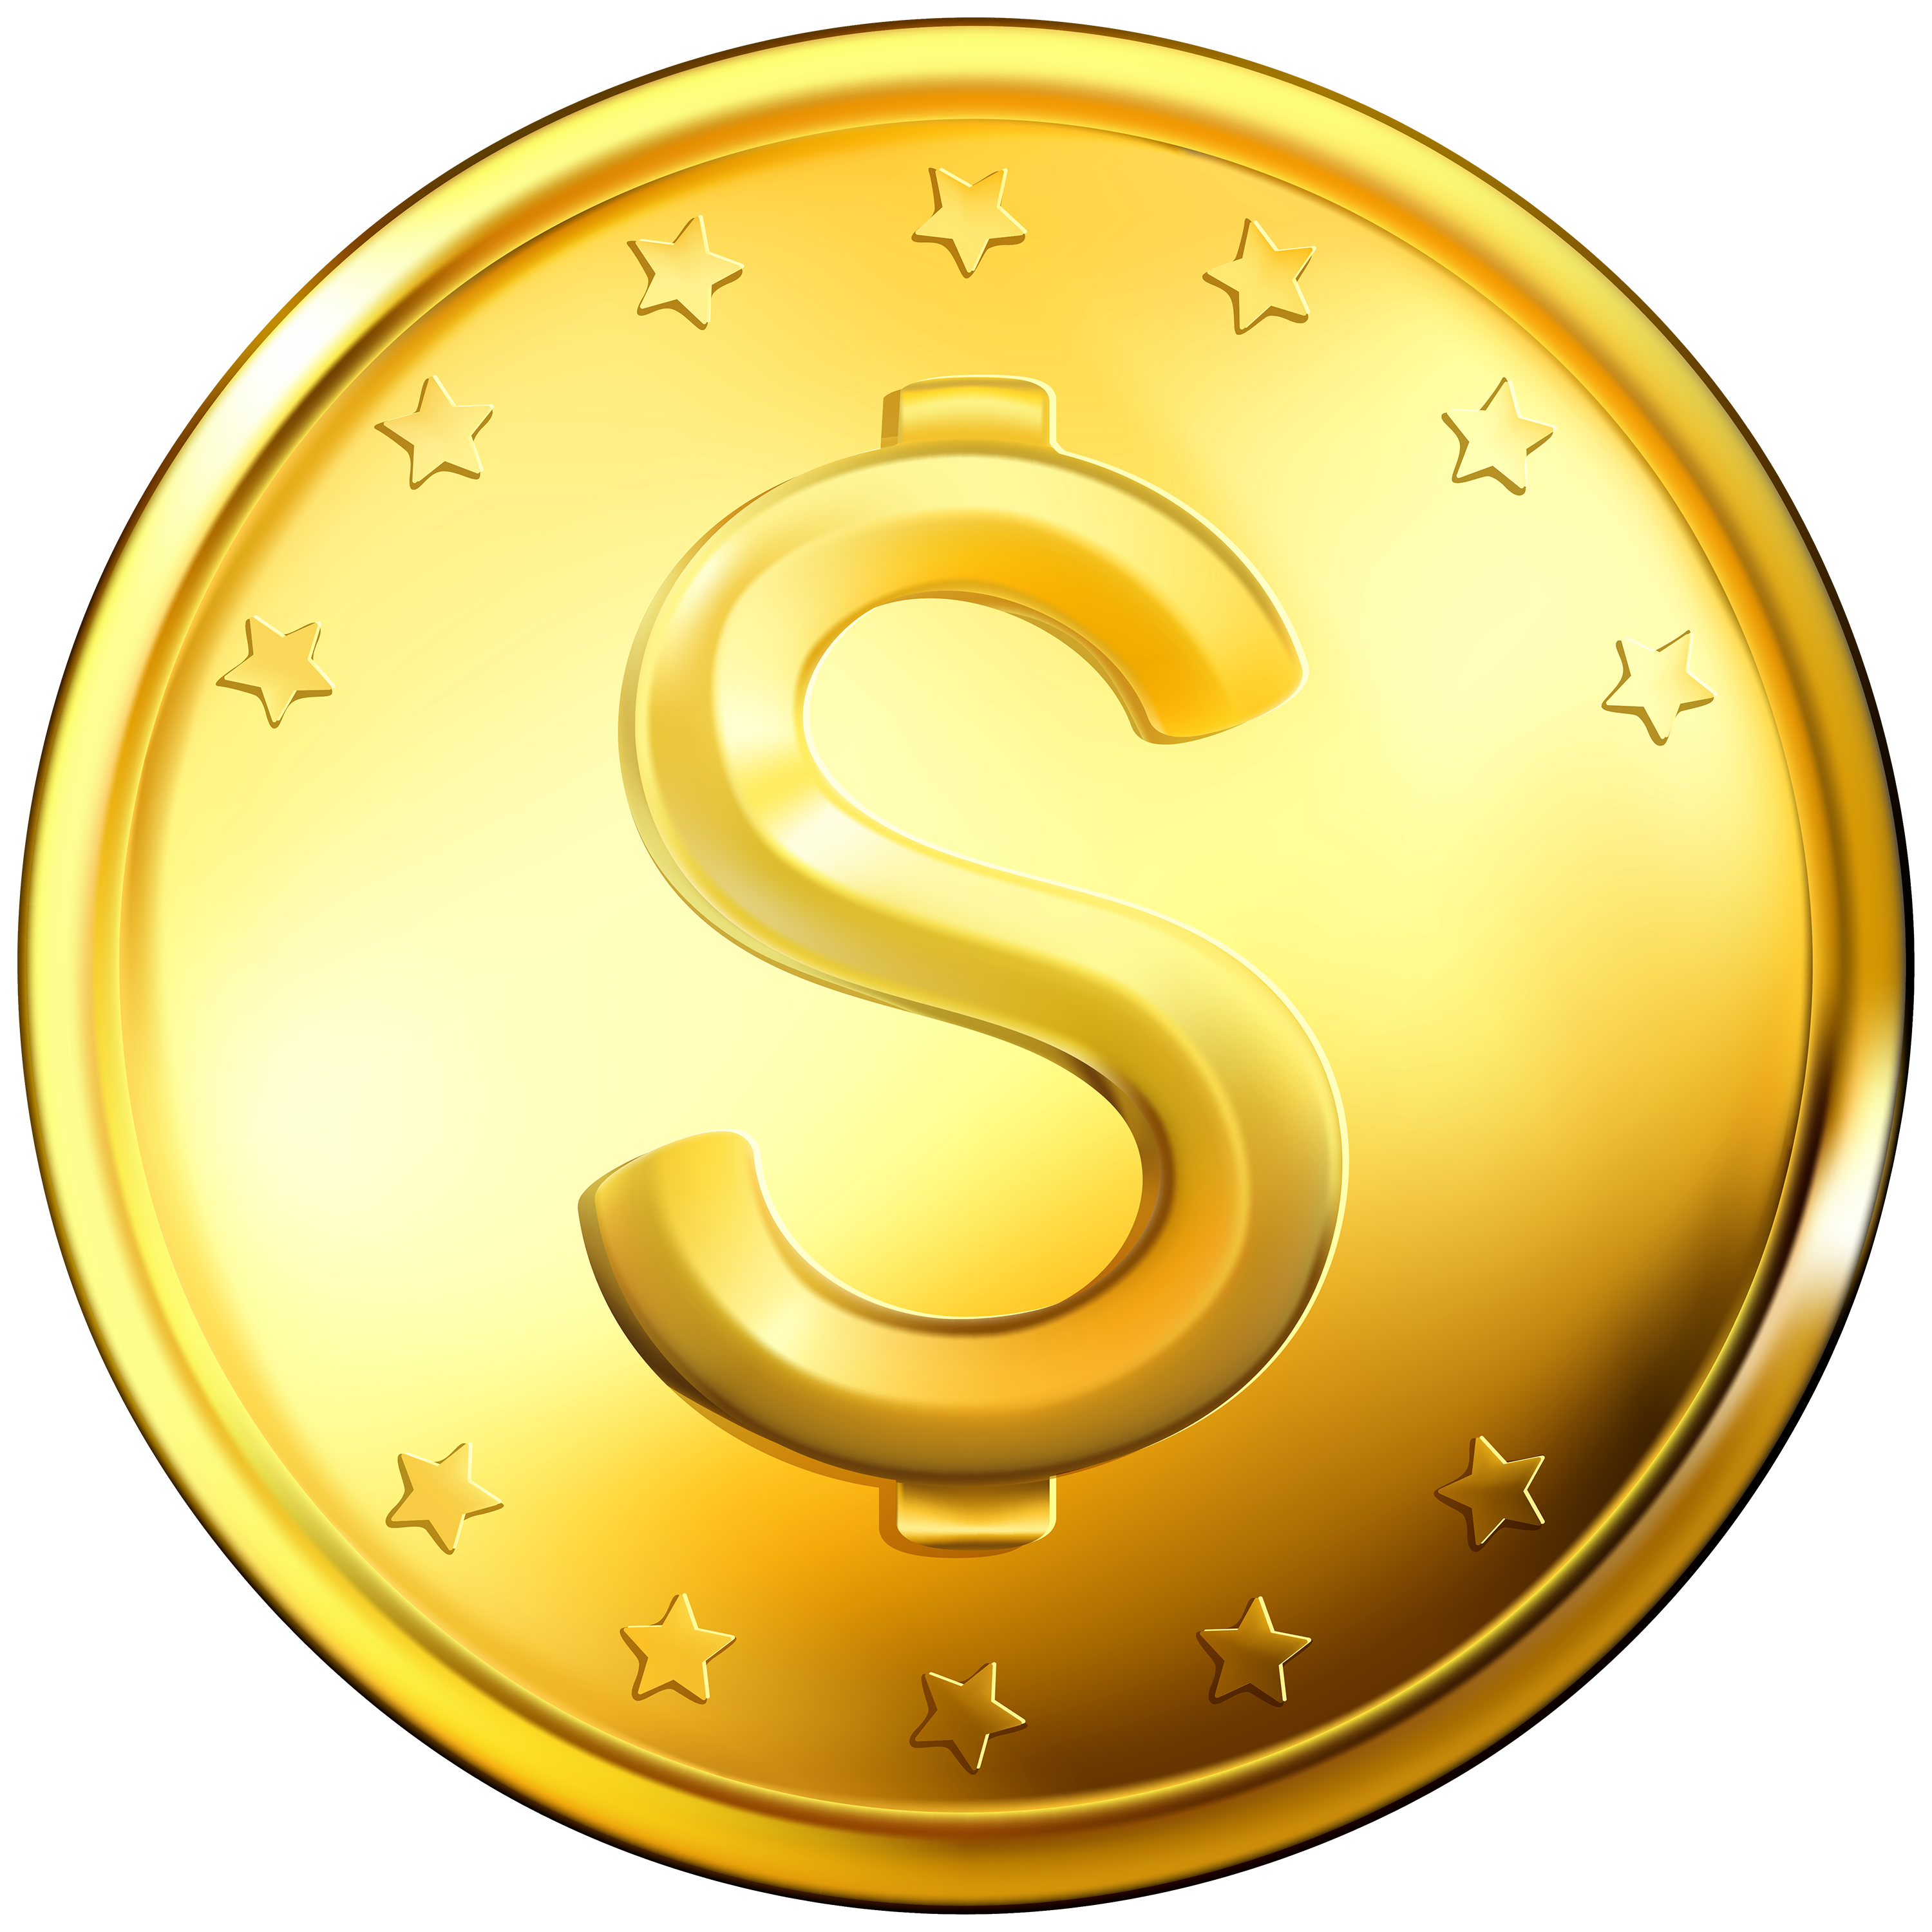 Gold Coins Png Hd Transparent Gold Coins Hd Png Images Pluspng